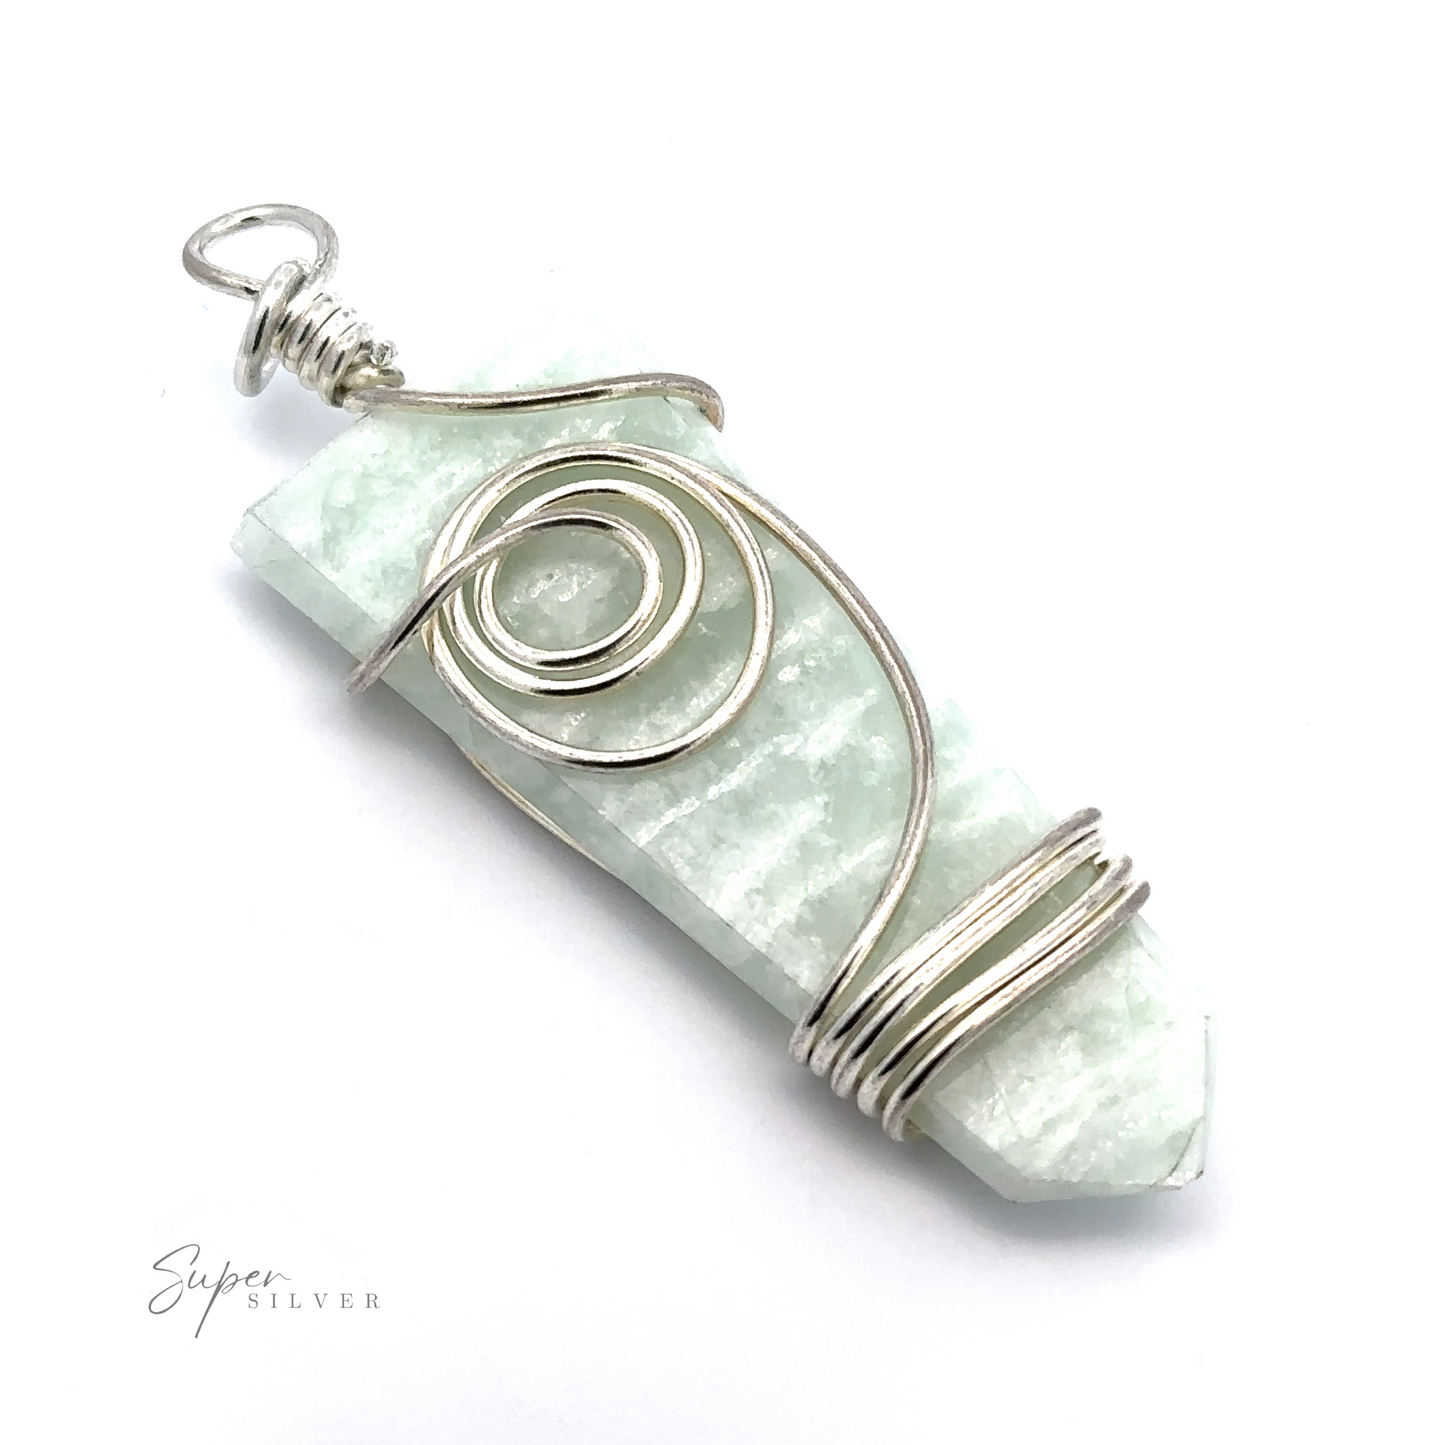 
                  
                    A light green gemstone pendant wrapped in silver wire with a loop for attaching to a necklace. The name "Stone Slab Pendant with Wire Wrapping" is visible on the bottom left corner, showcasing an exquisite piece of mixed metals and wire-wrapped jewelry.
                  
                